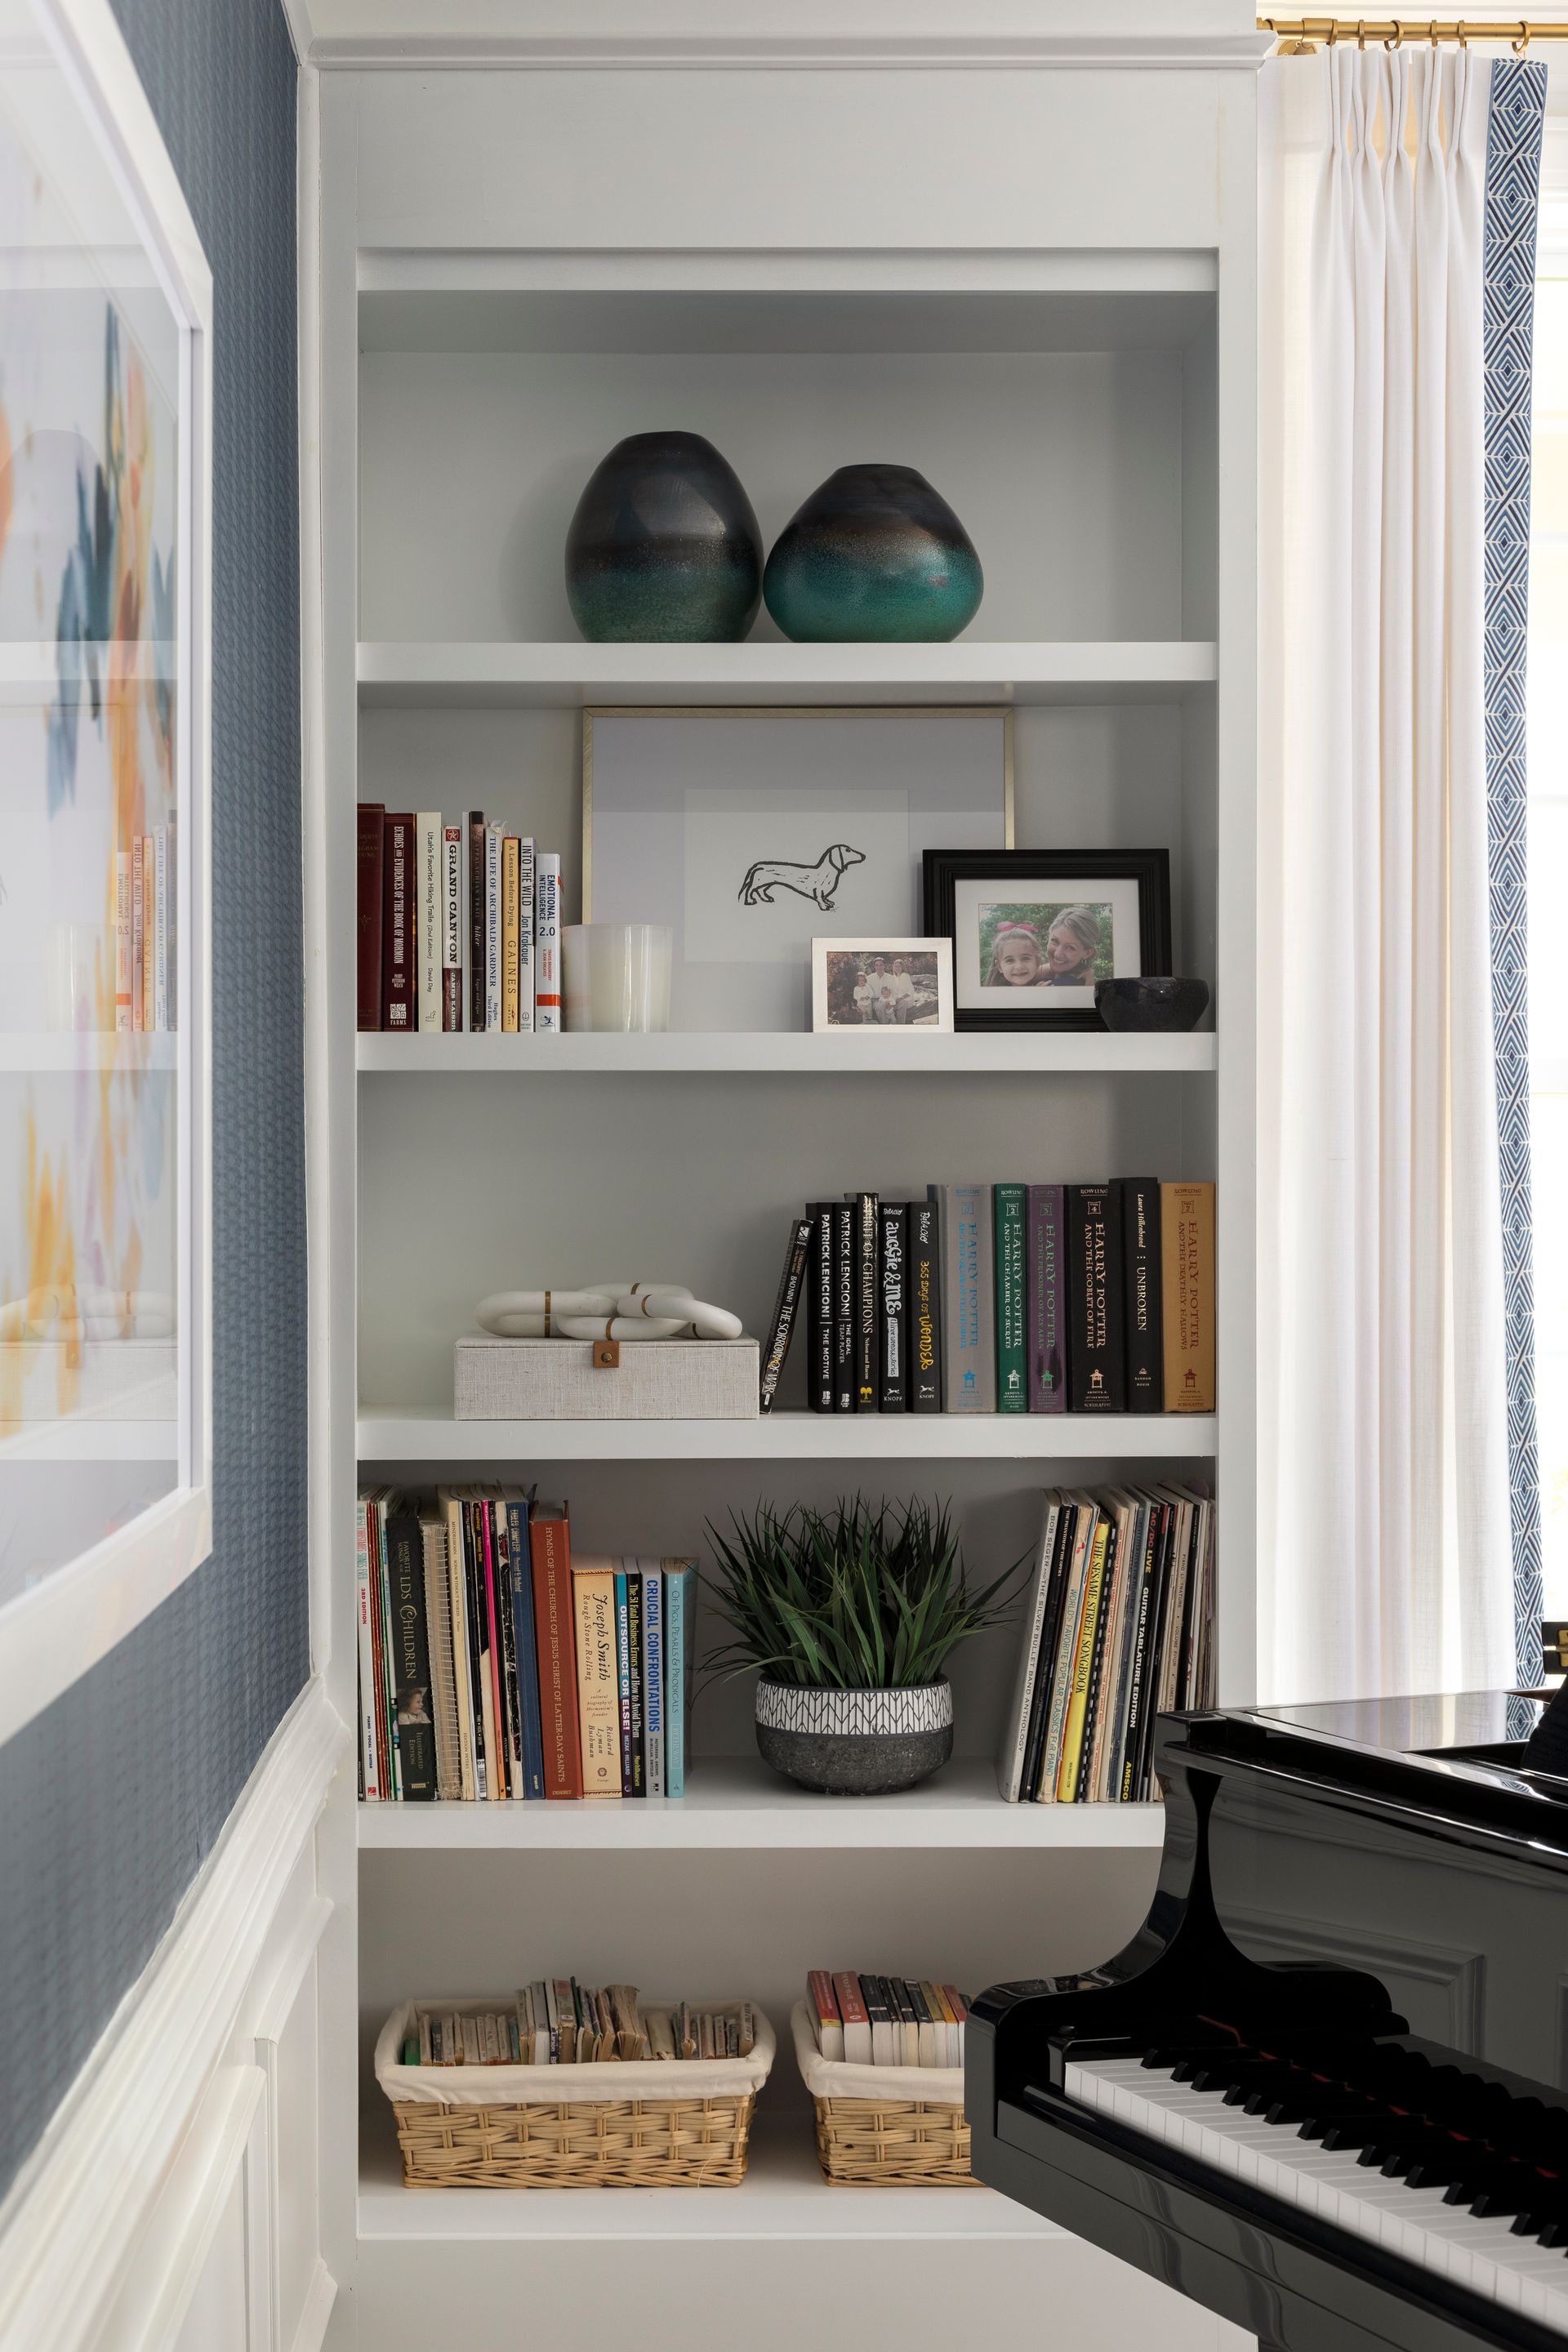 Built-ins, the Way to a Stressless, Organized Home